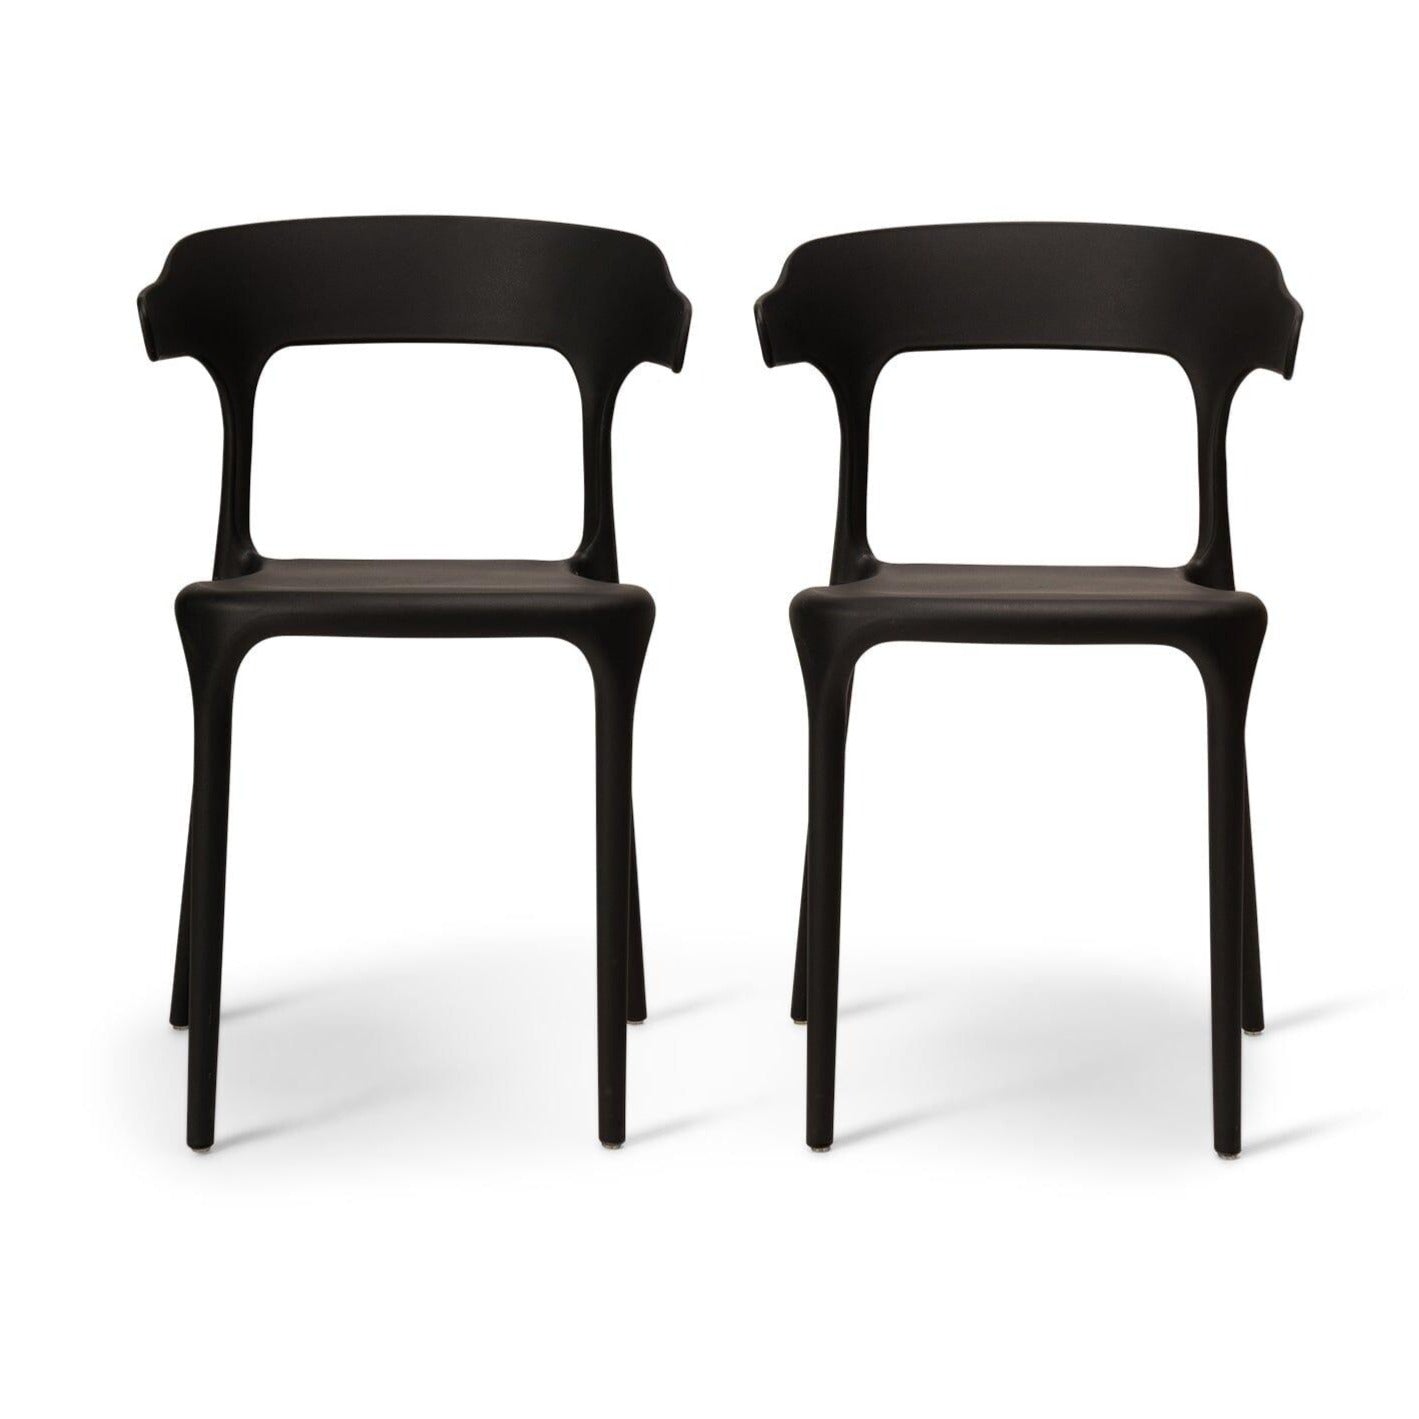 Finn dining chairs - set of 4 - black - Laura James